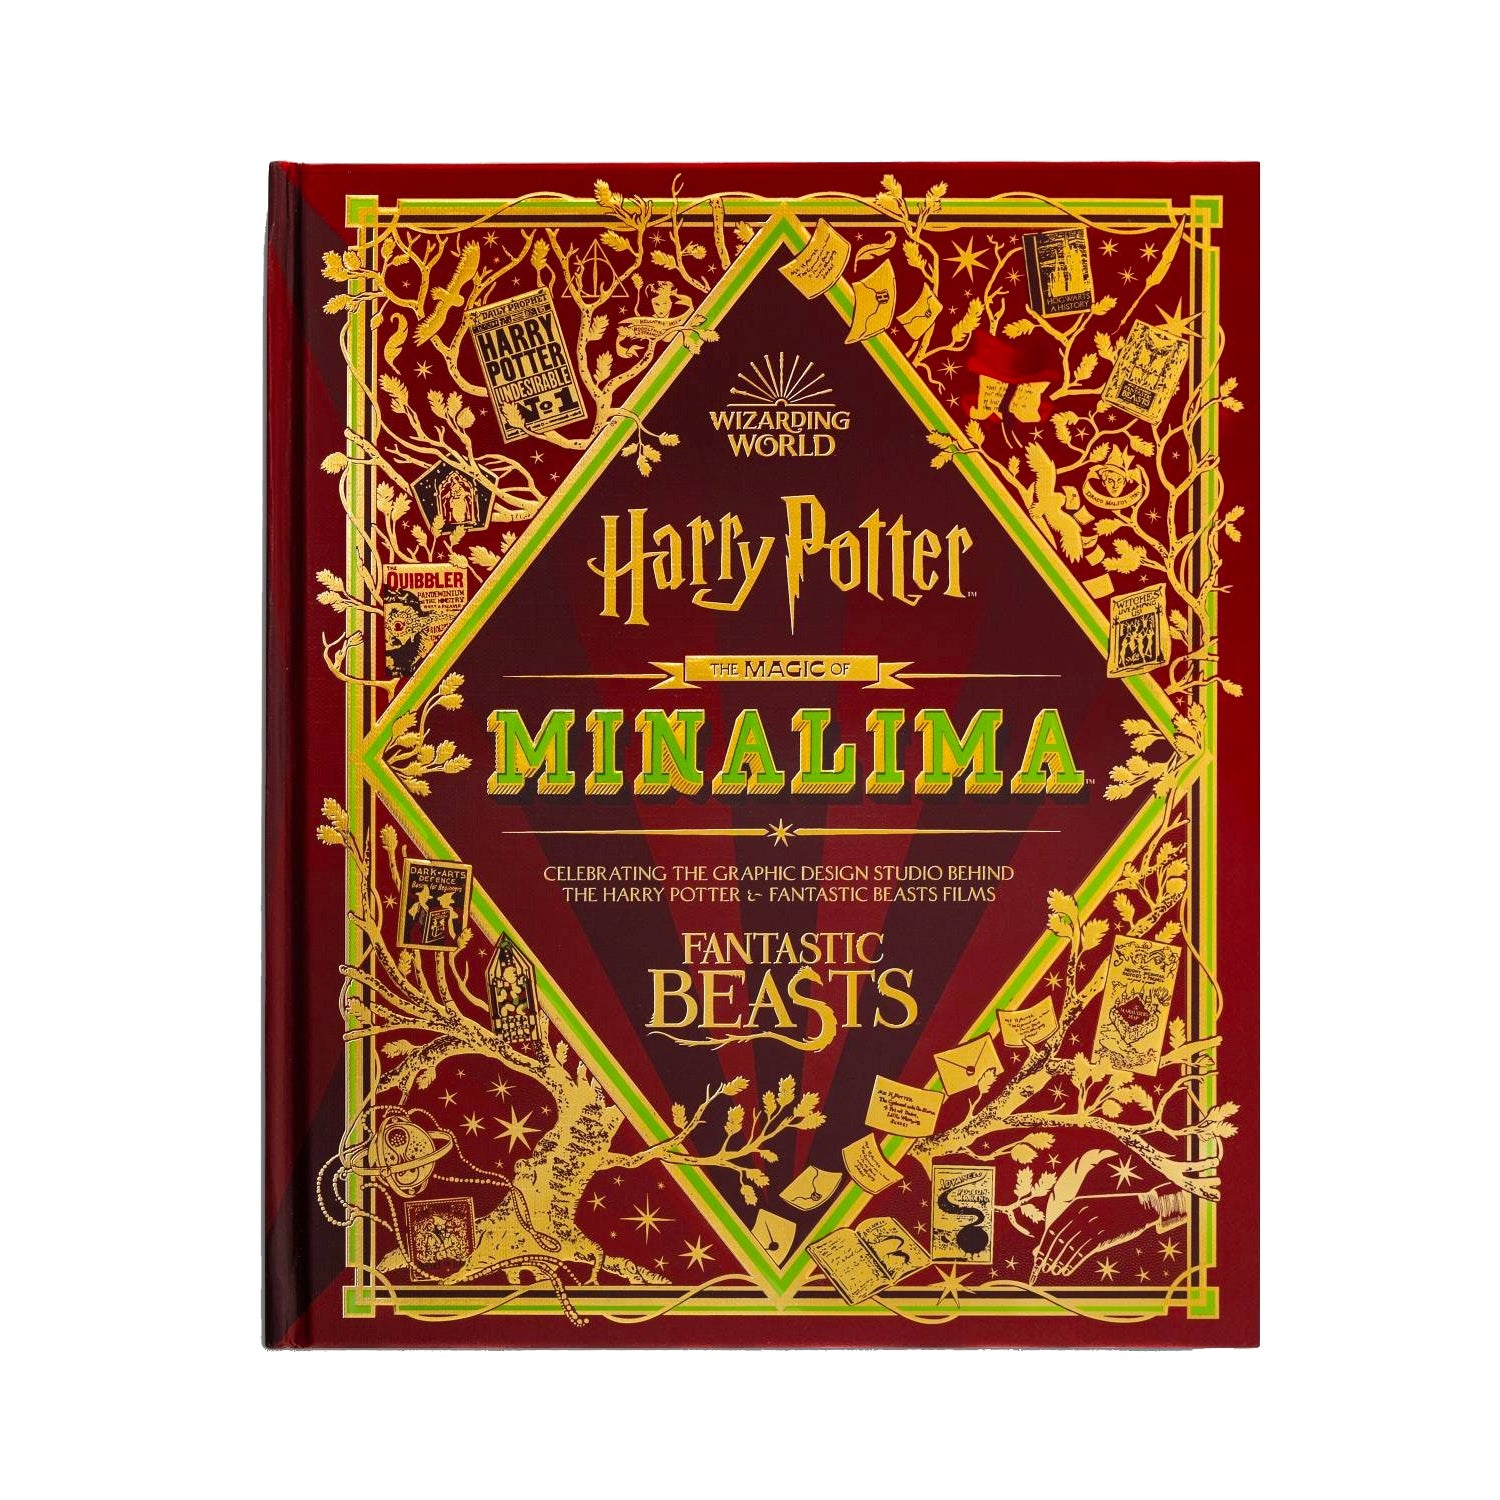 Harry Potter Mina Lima Collection Years 1 & 2 - LIKE NEW